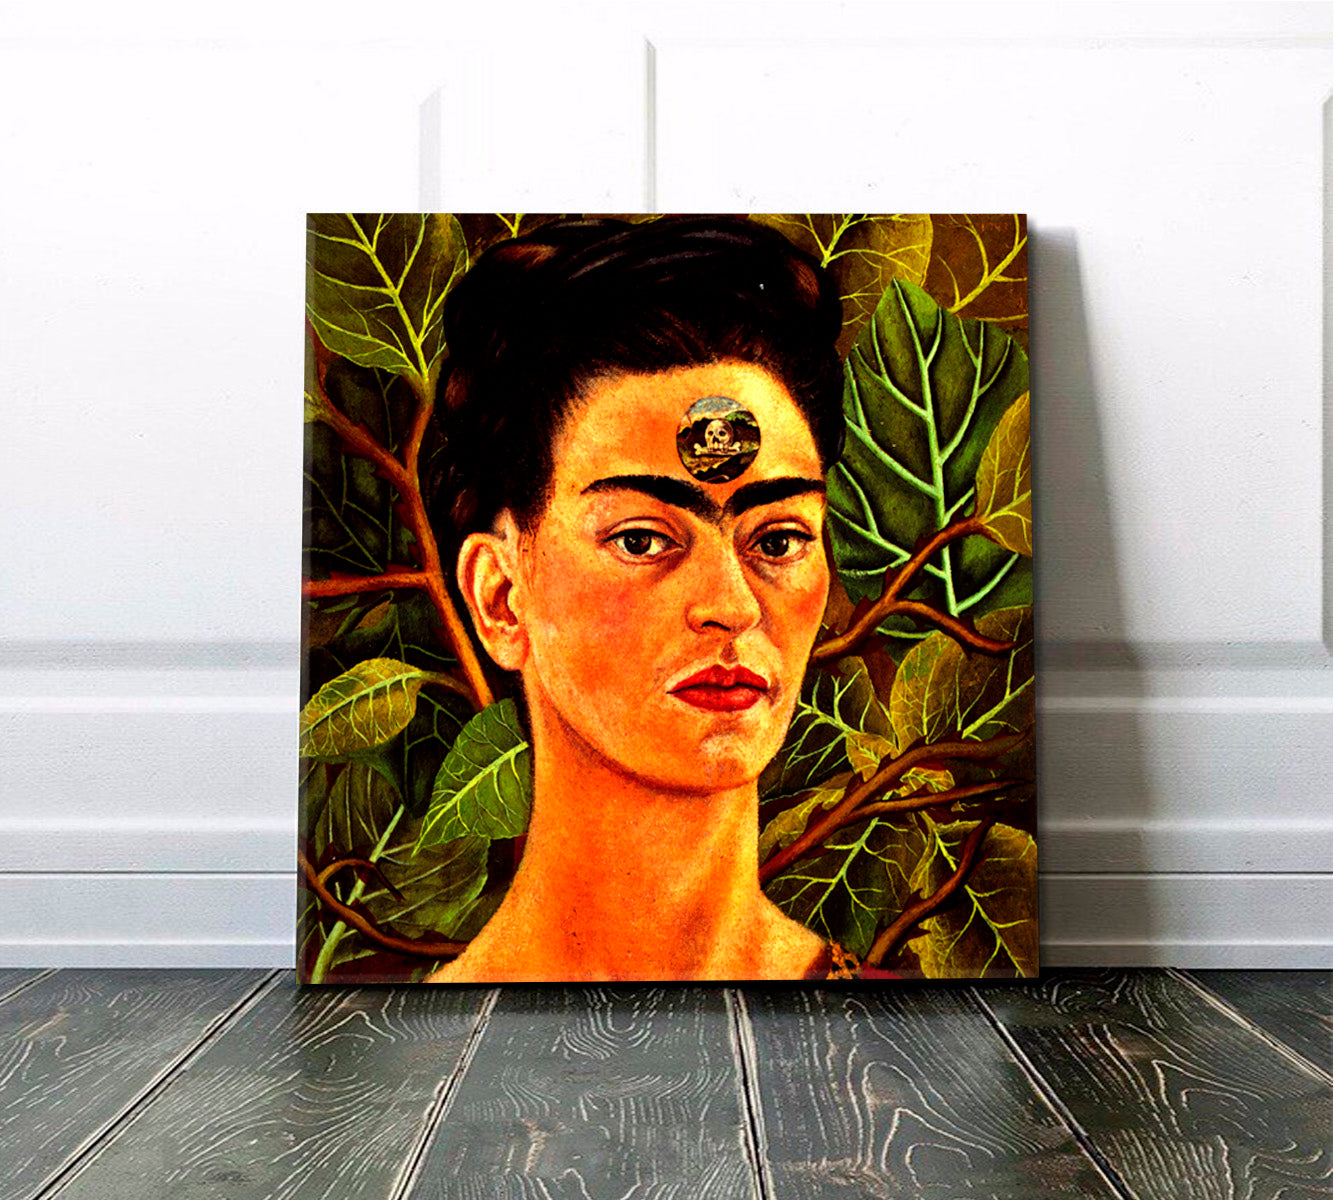 FRIDA KAHLO Portrait Nature and Artifacts ‎Magic Realism - Square People Portrait Wall Hangings Artesty 1 Panel 12"x12" 